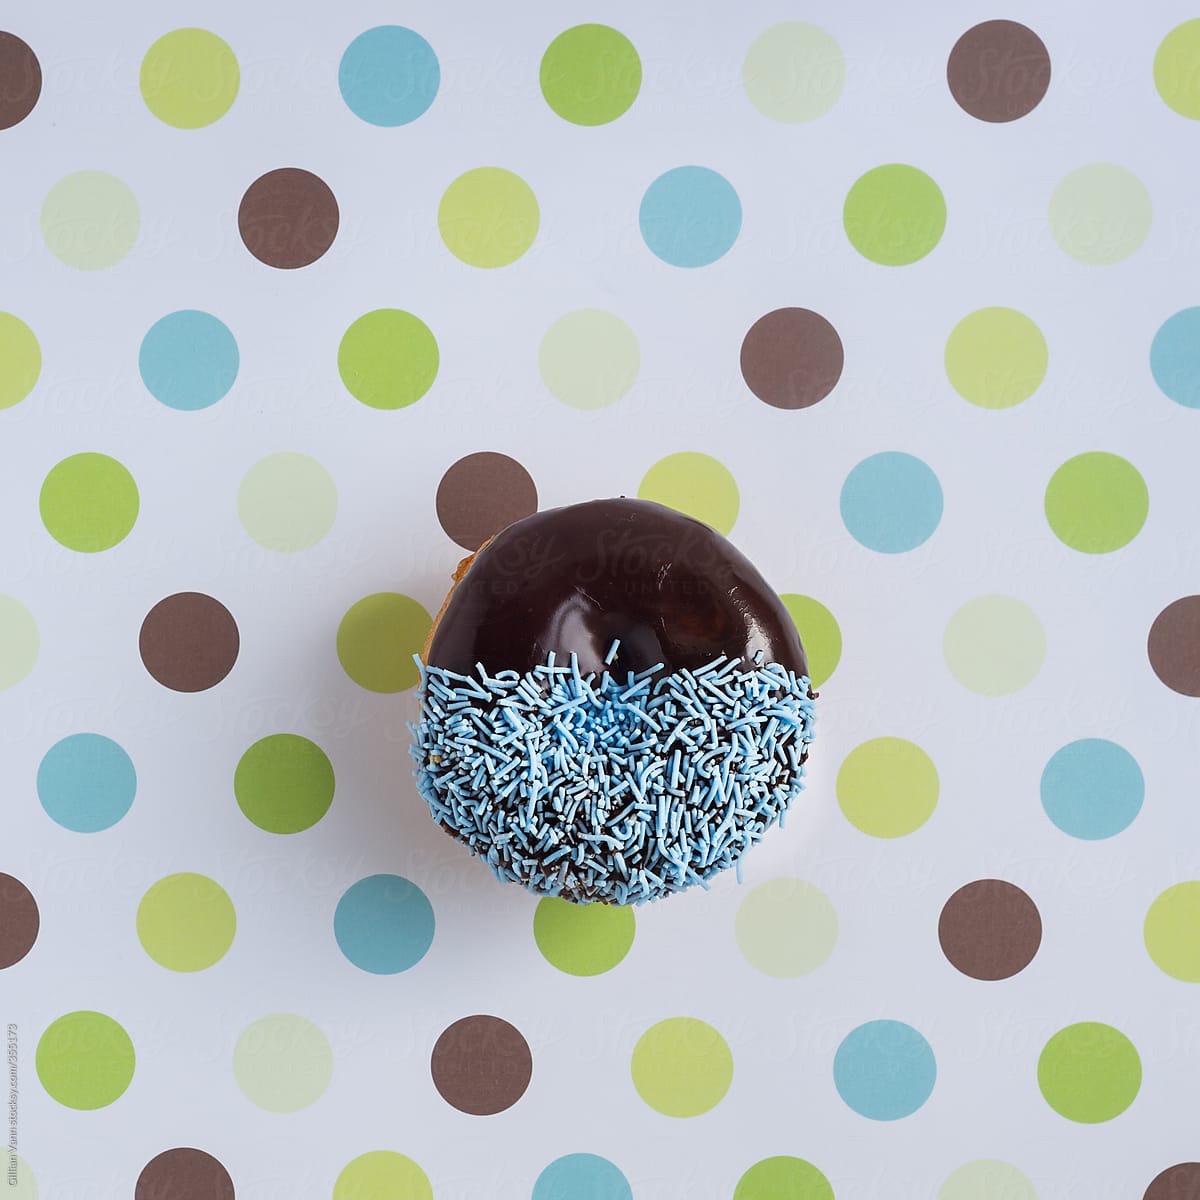 donut with chocolate icing and blue sprinkles on dotty background